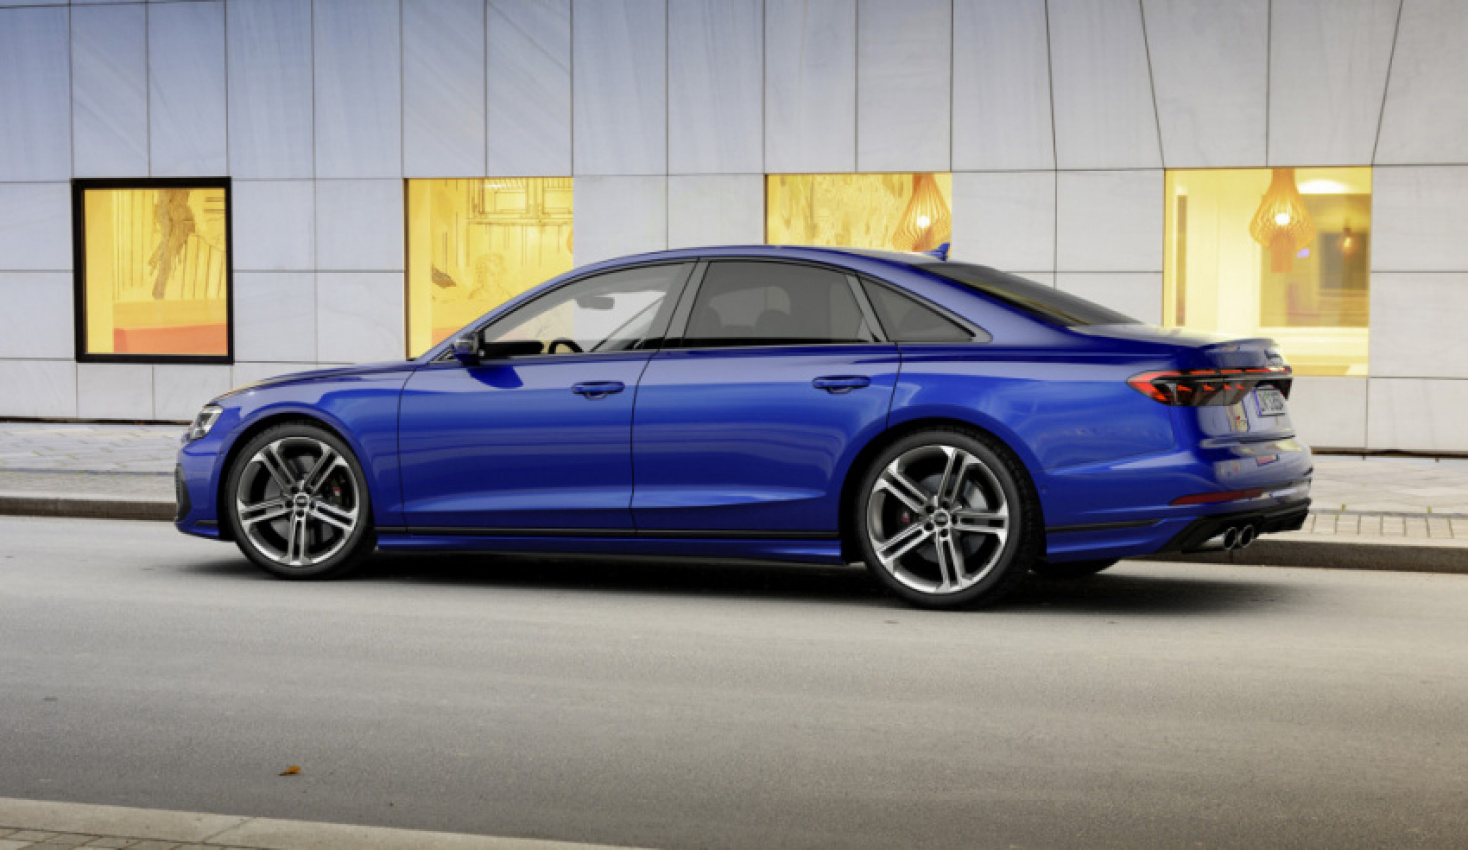 audi, autos, cars, audi a8 news, audi news, audi s8, first drives, luxury cars, performance, sedans, first drive review: 2022 audi s8 gets a new look, same split personality